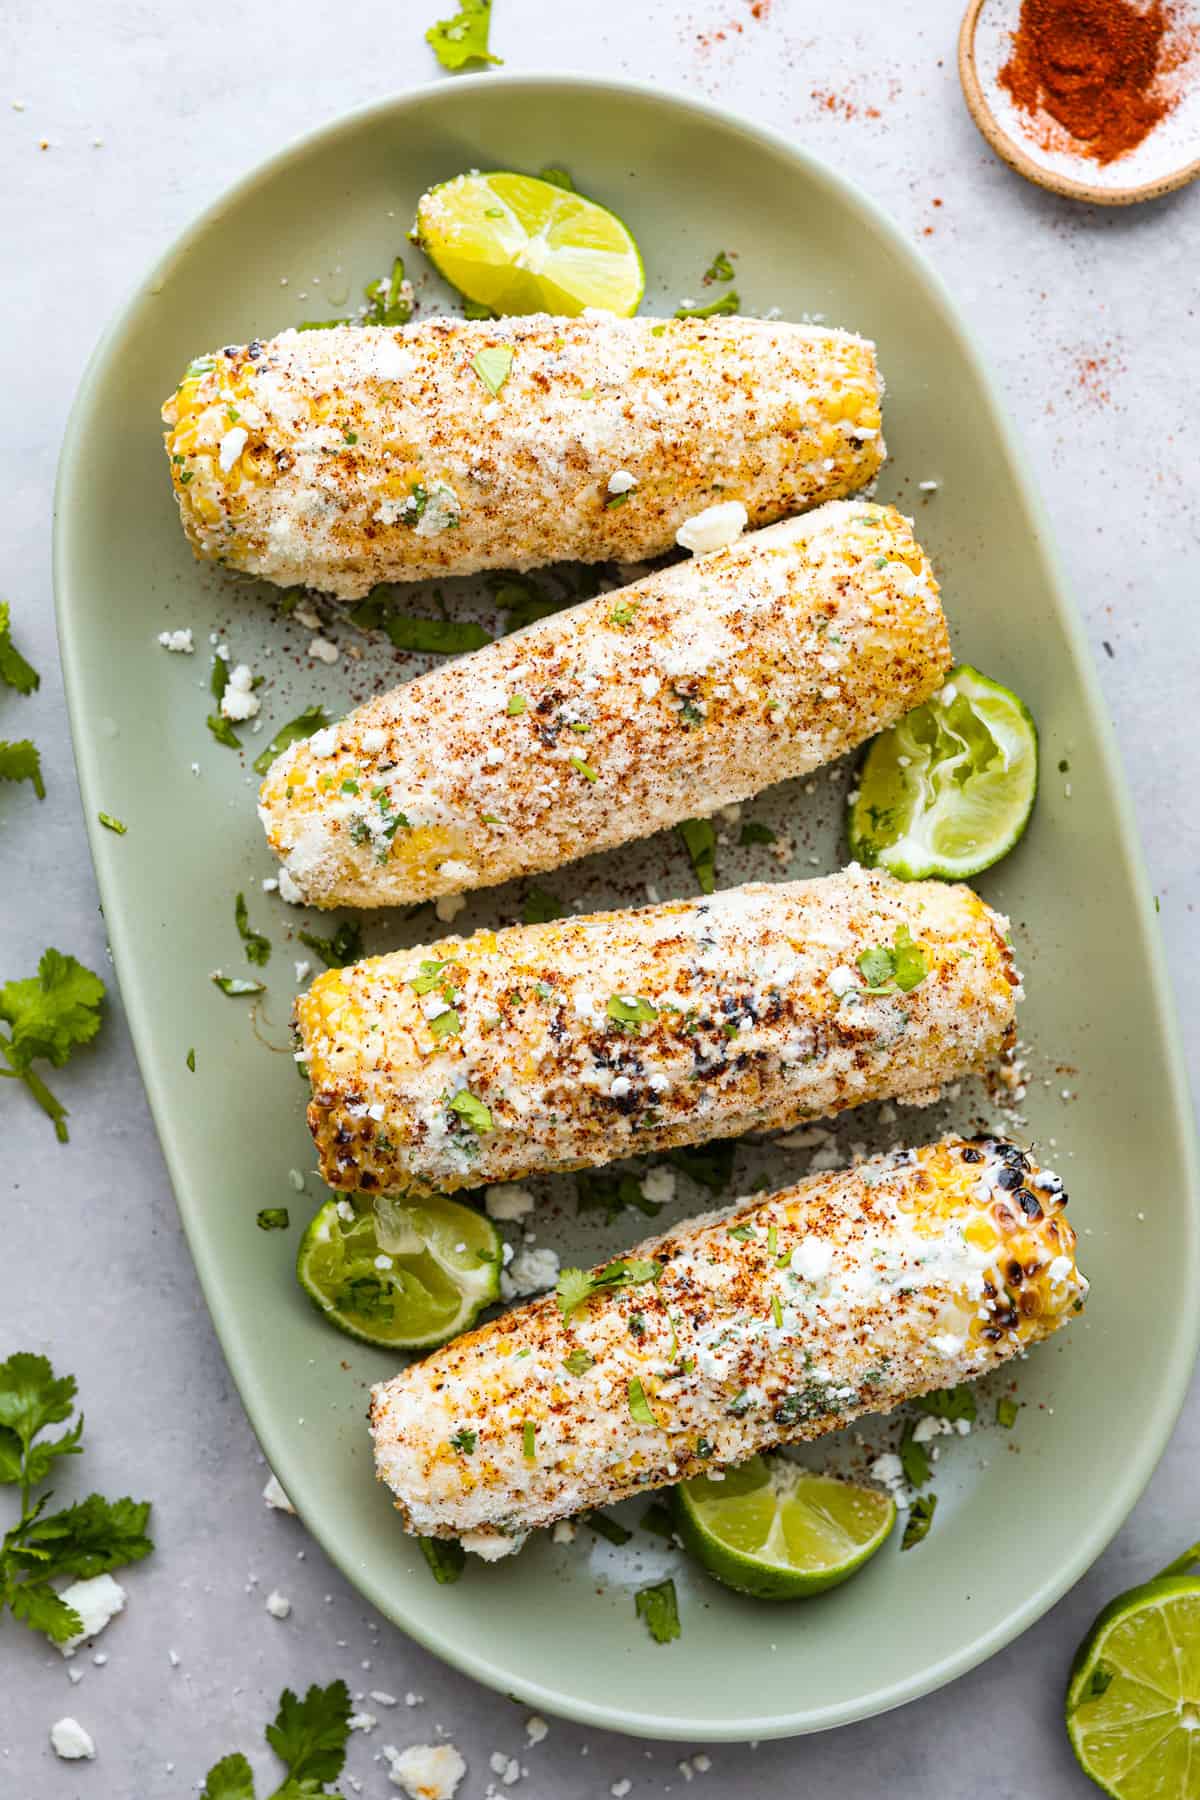 https://therecipecritic.com/wp-content/uploads/2023/04/grilled-mexican-street-corn-1.jpg